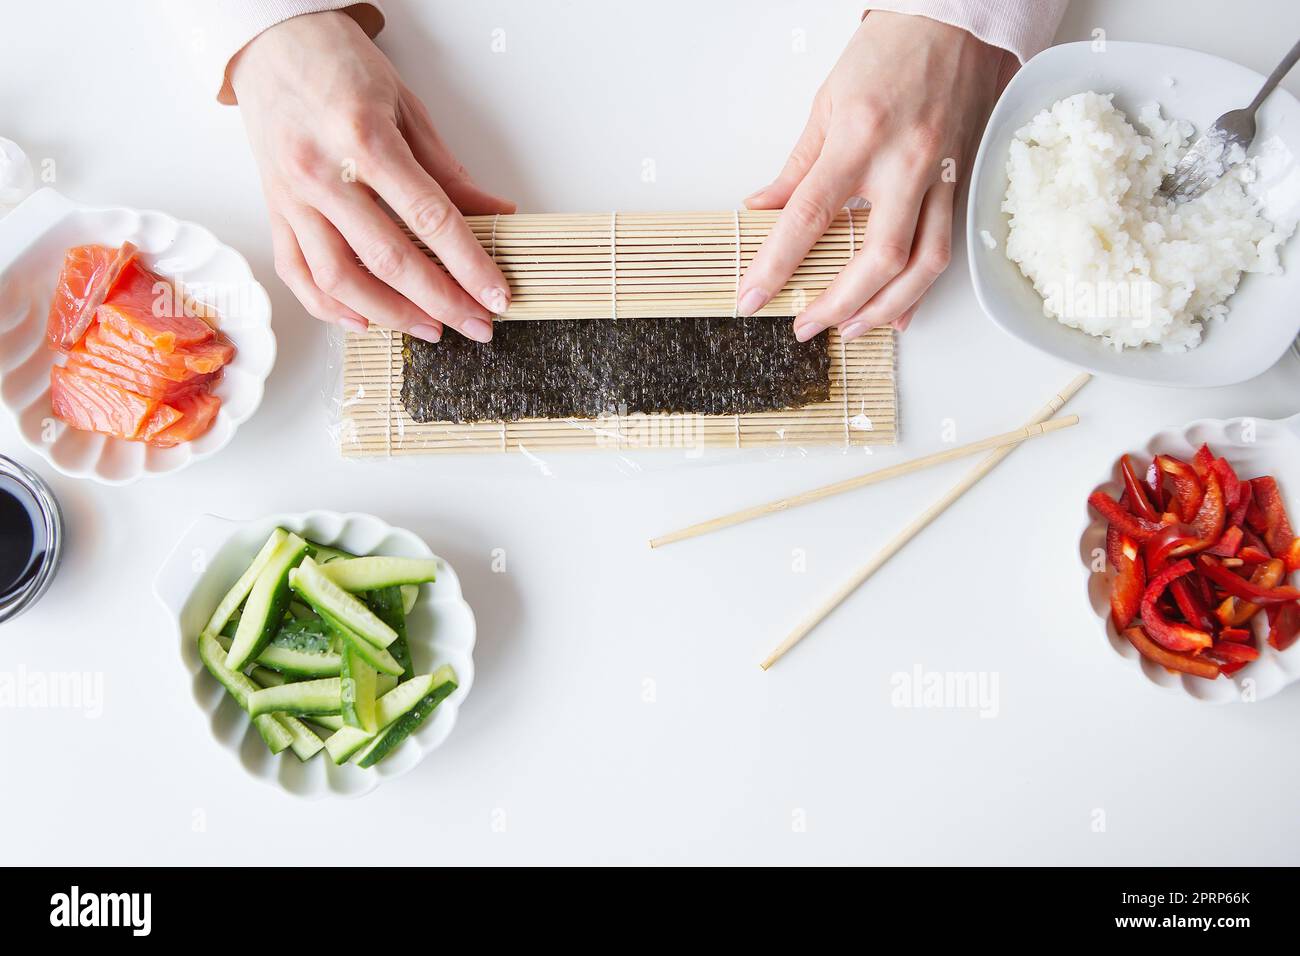 Sushi preparation process, the girl makes sushi with different flavors - fresh salmon, caviar, avocado, cucumber, ginger, rice. Stock Photo